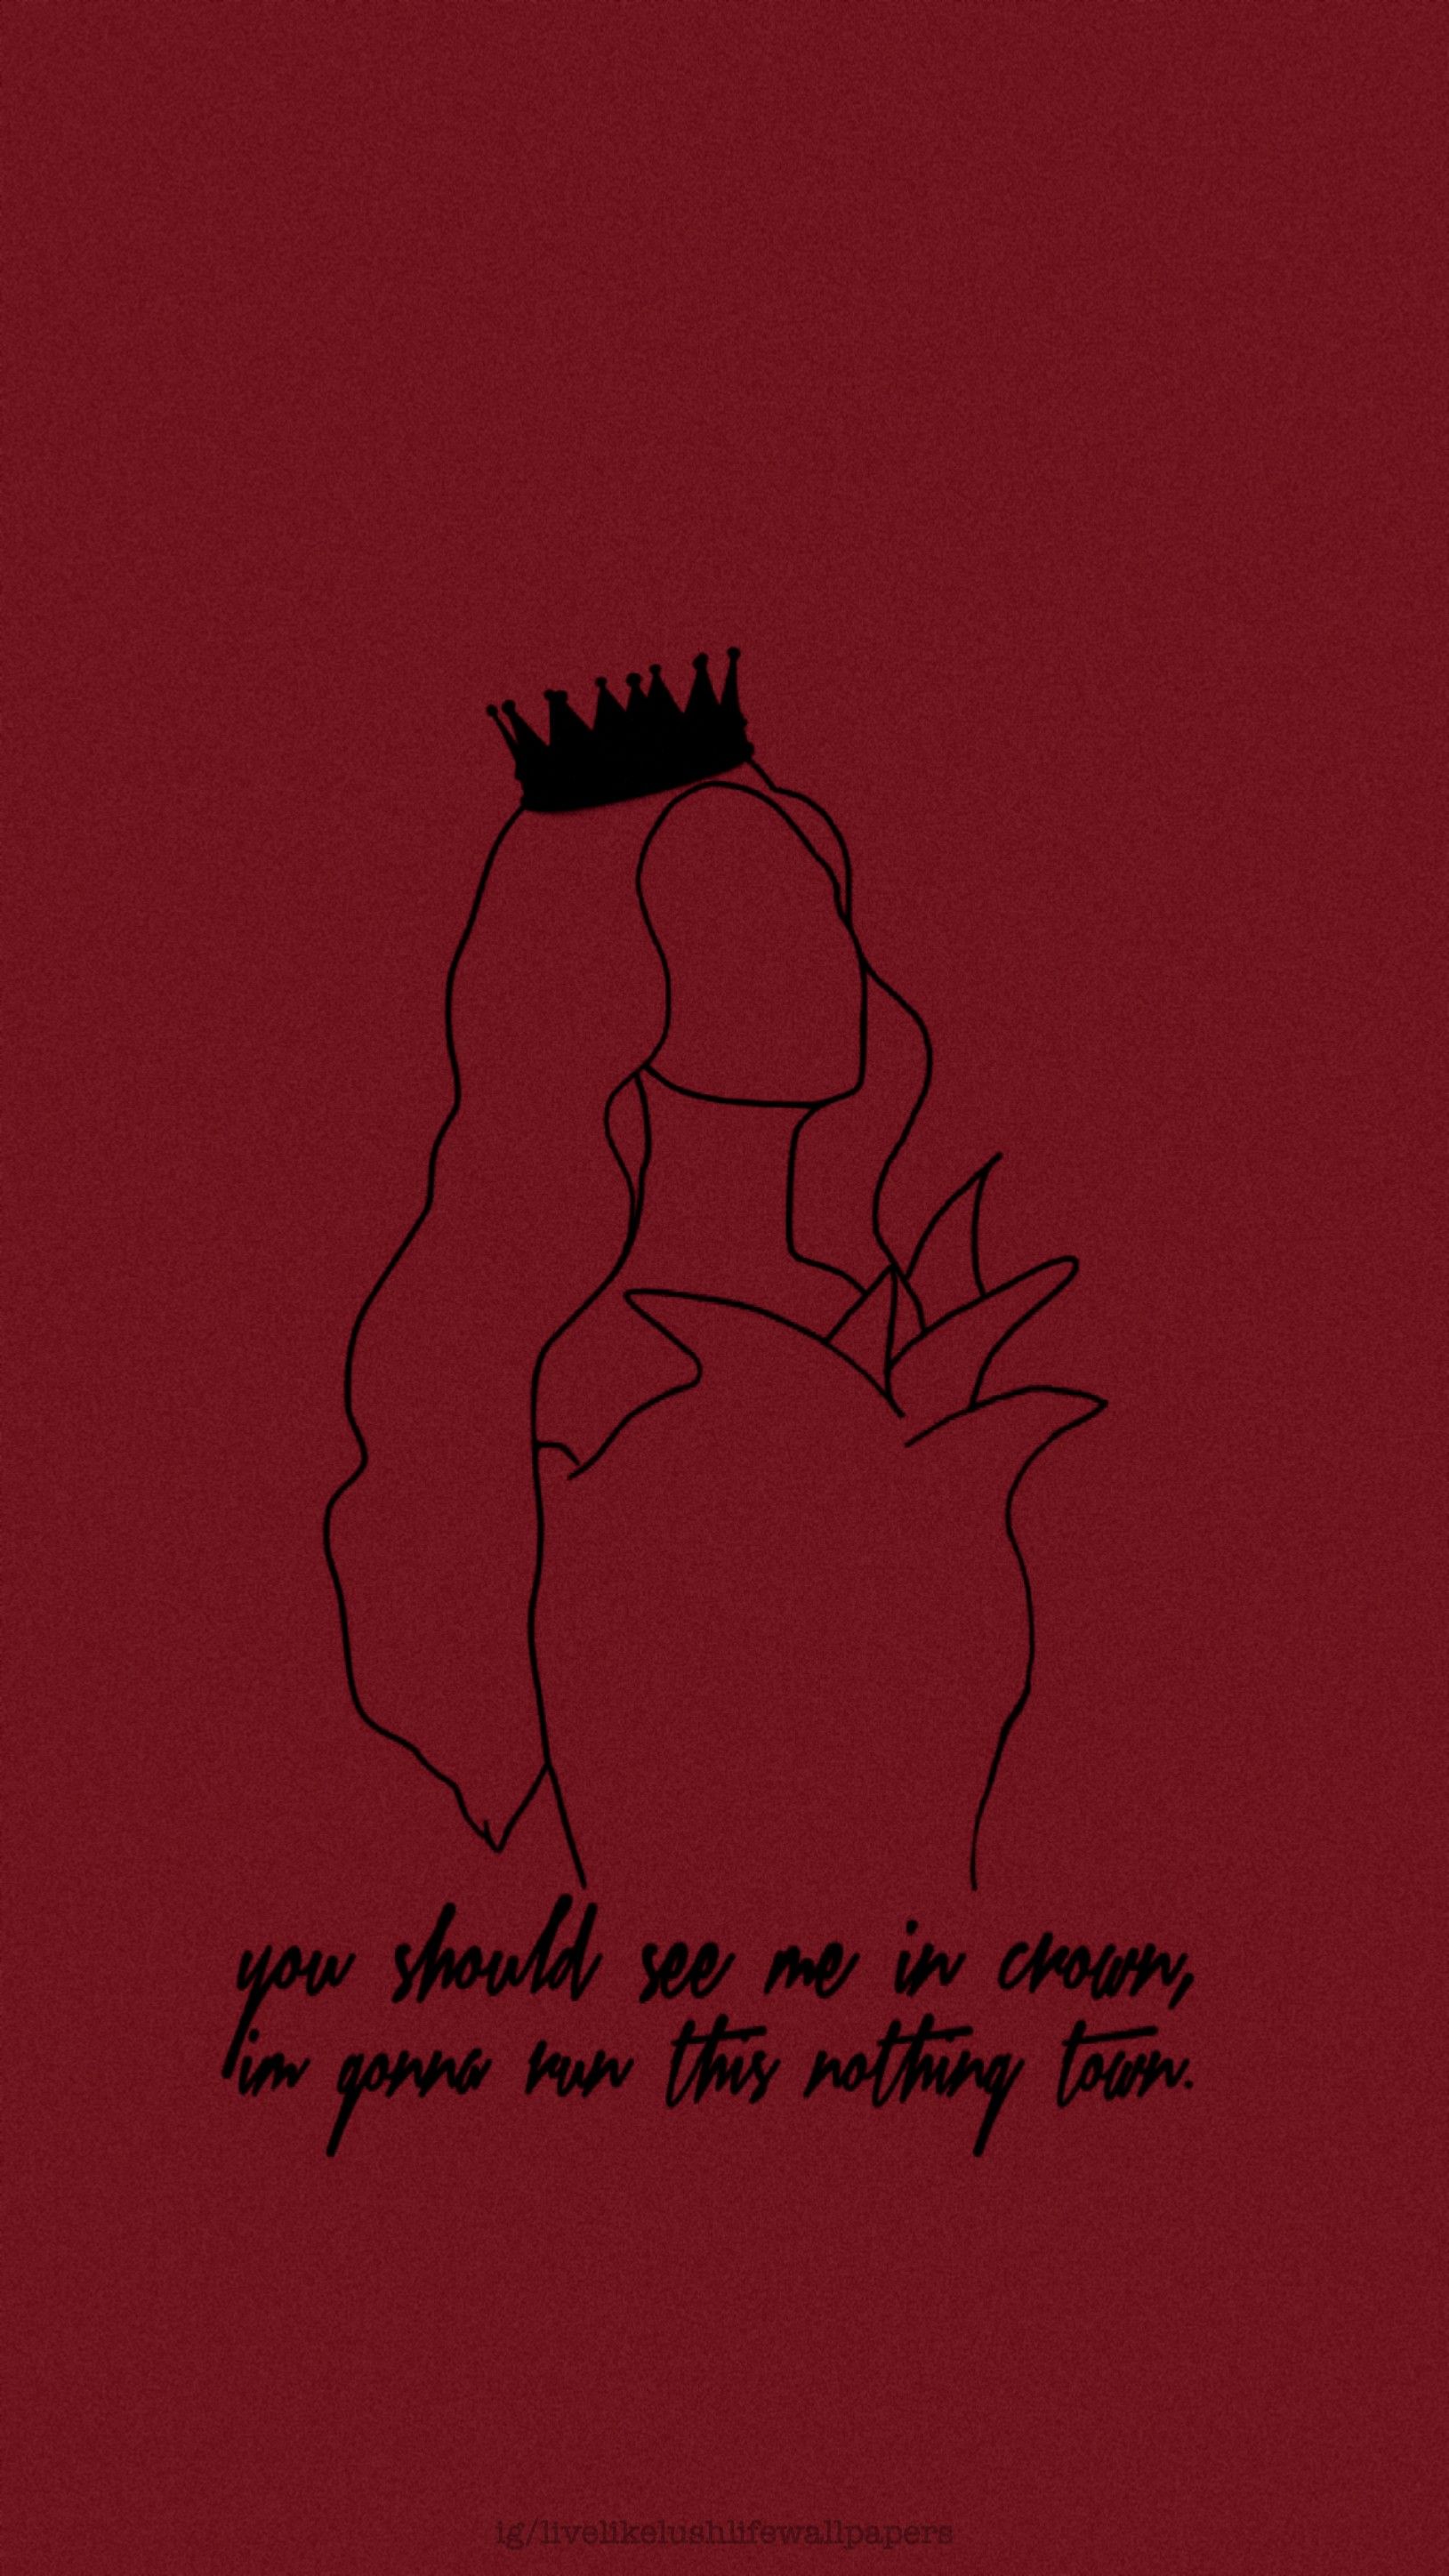 IPhone wallpaper of the song 'Crown' by The Weeknd - Crown